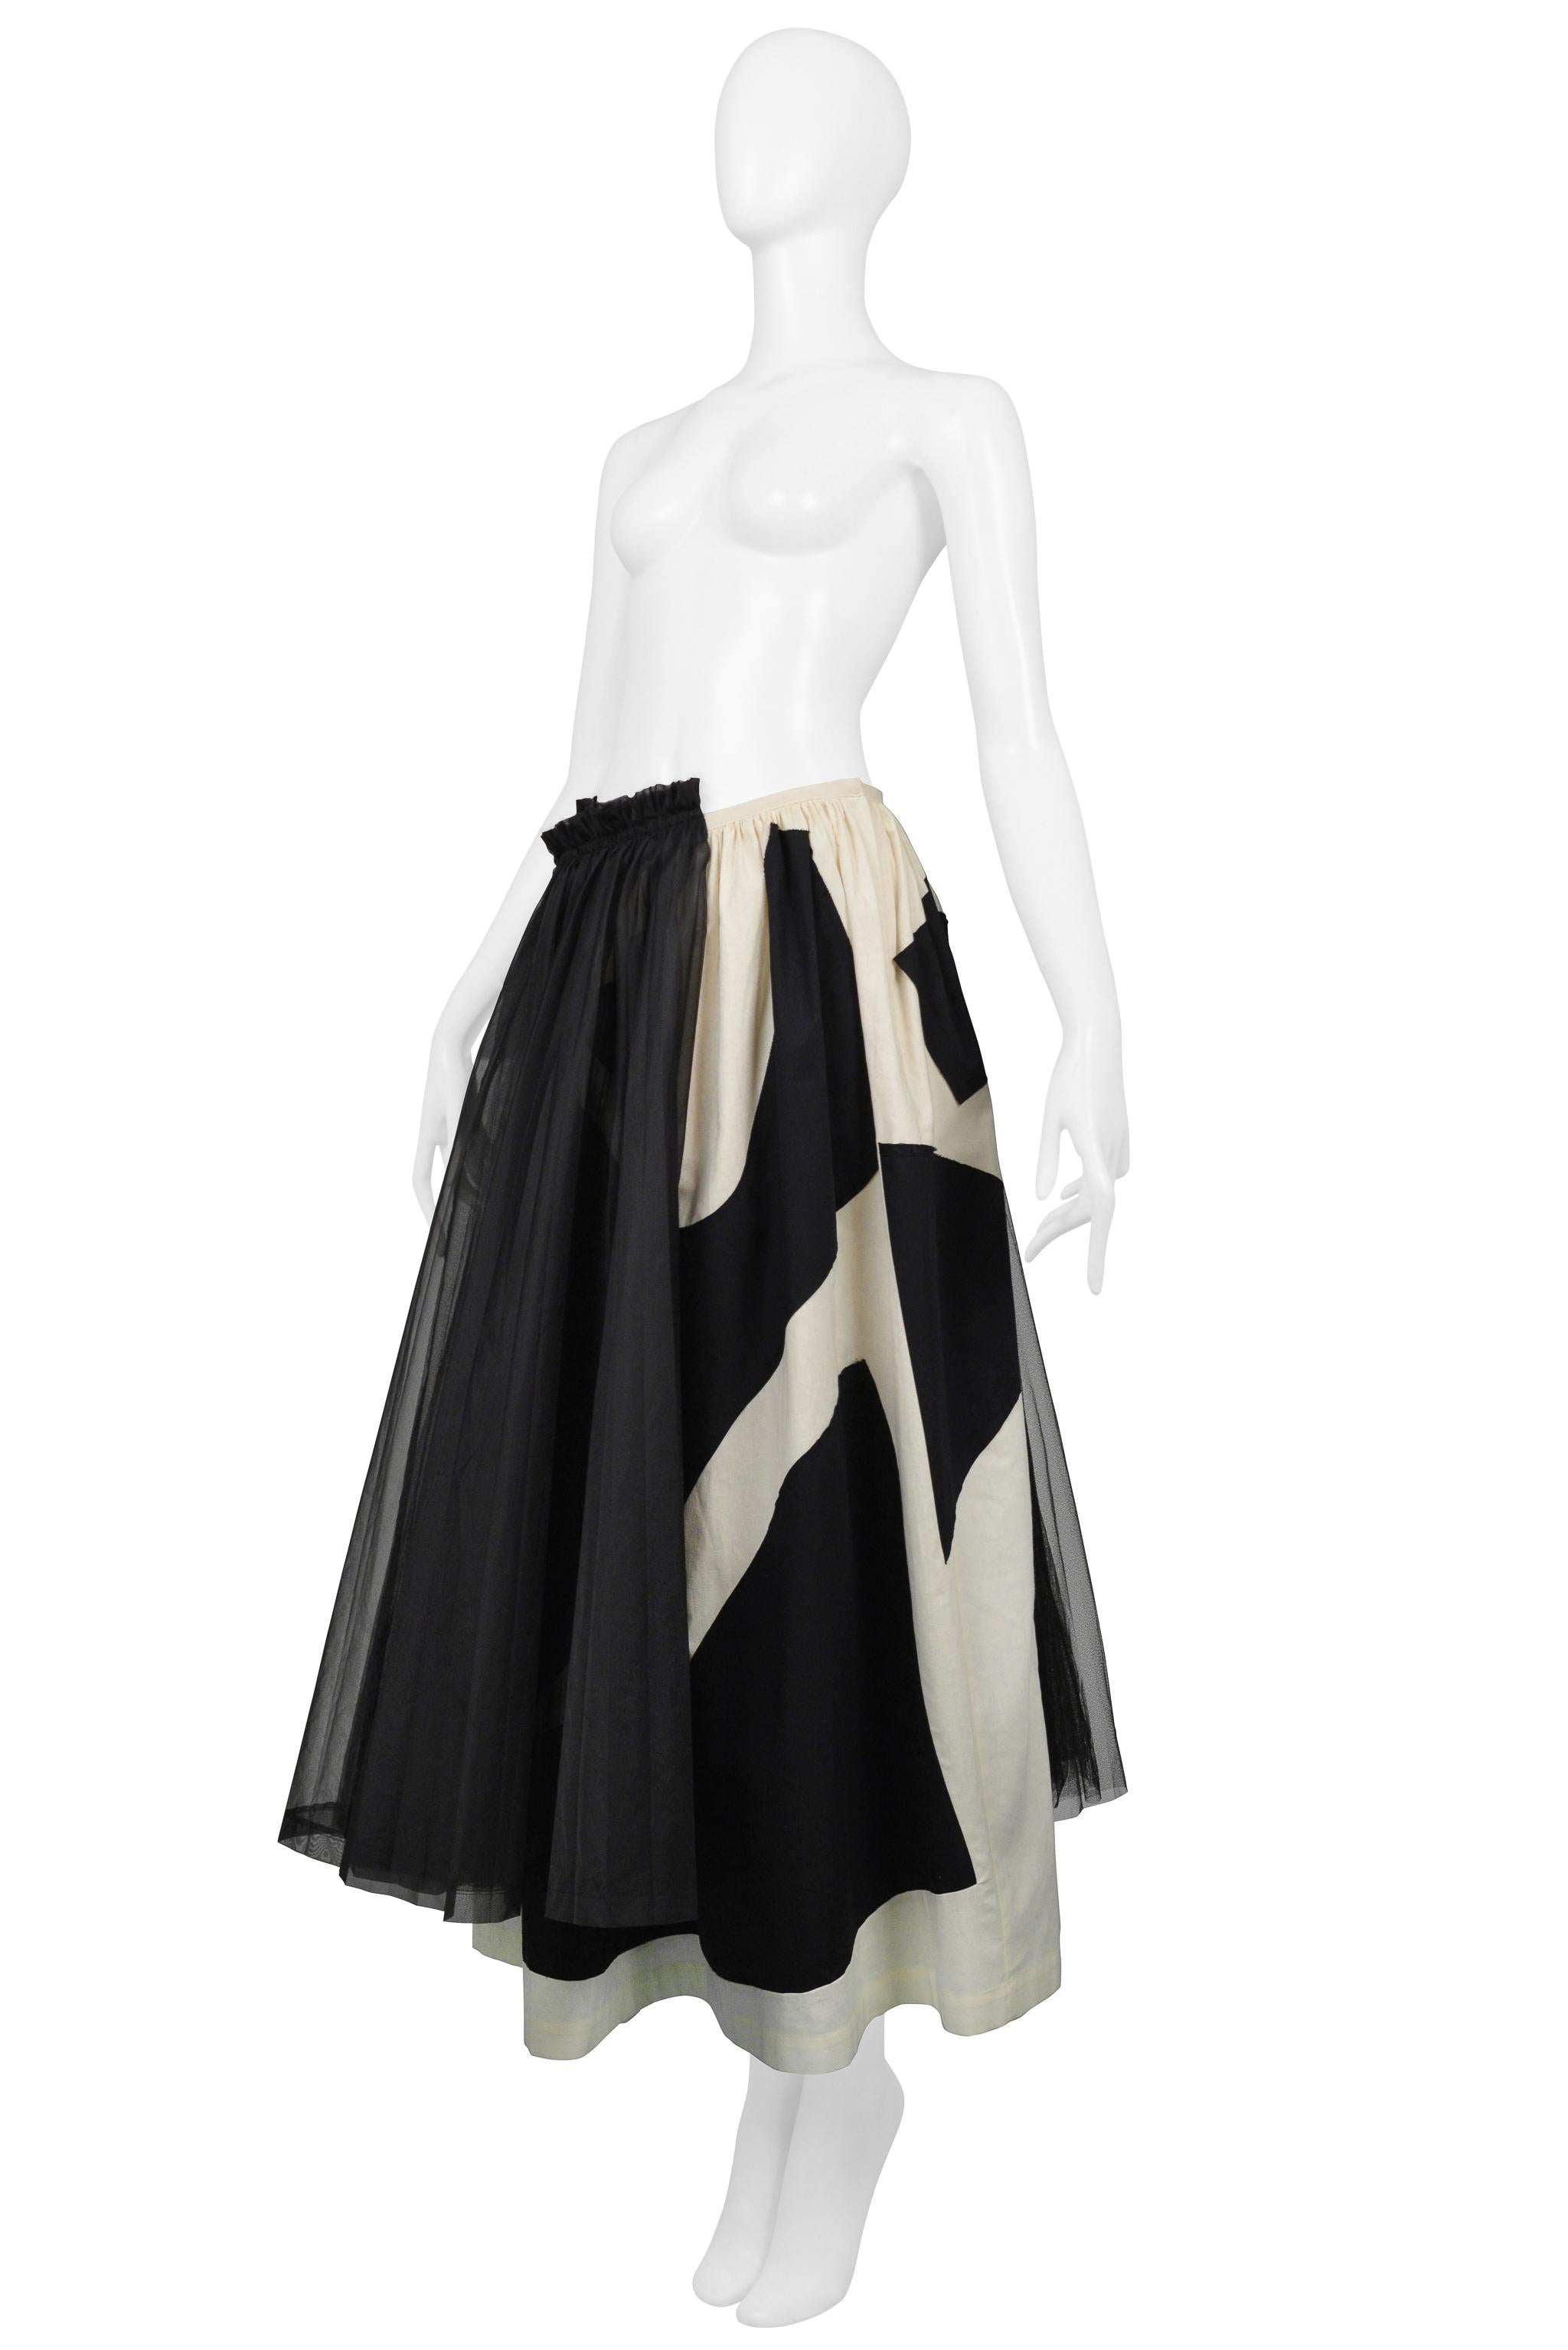 Comme Des Garcons Off-White & Black Abstract Skirt With Black Tulle 2002 For Sale 1